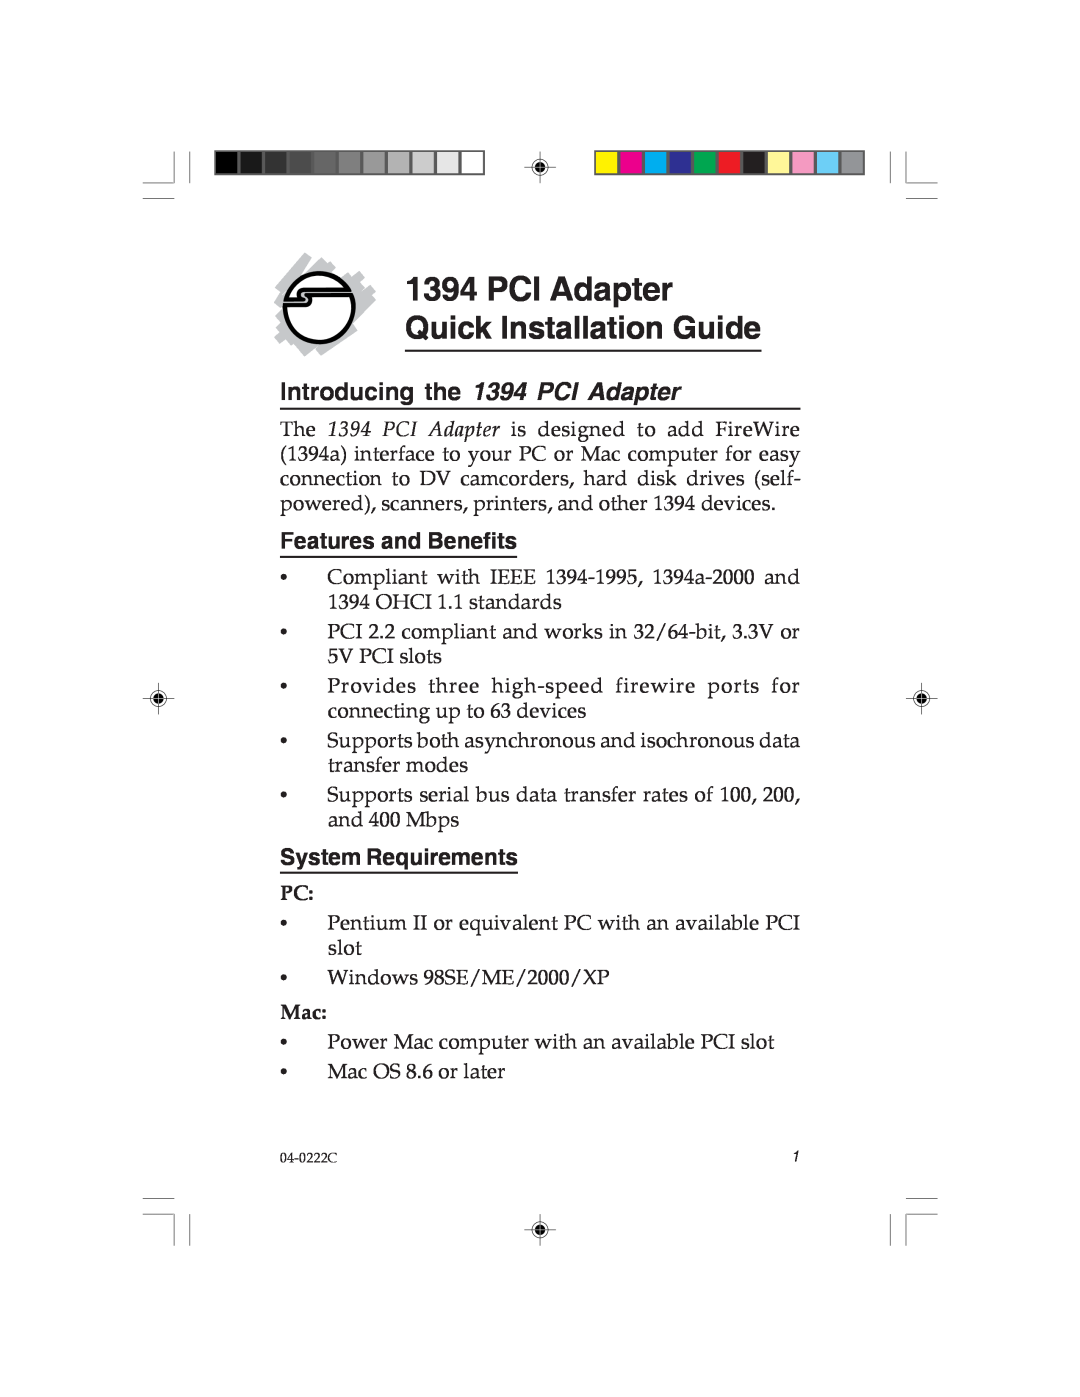 SIIG manual Introducing the 1394 PCI Adapter, Features and Benefits, System Requirements, Quick Installation Guide 